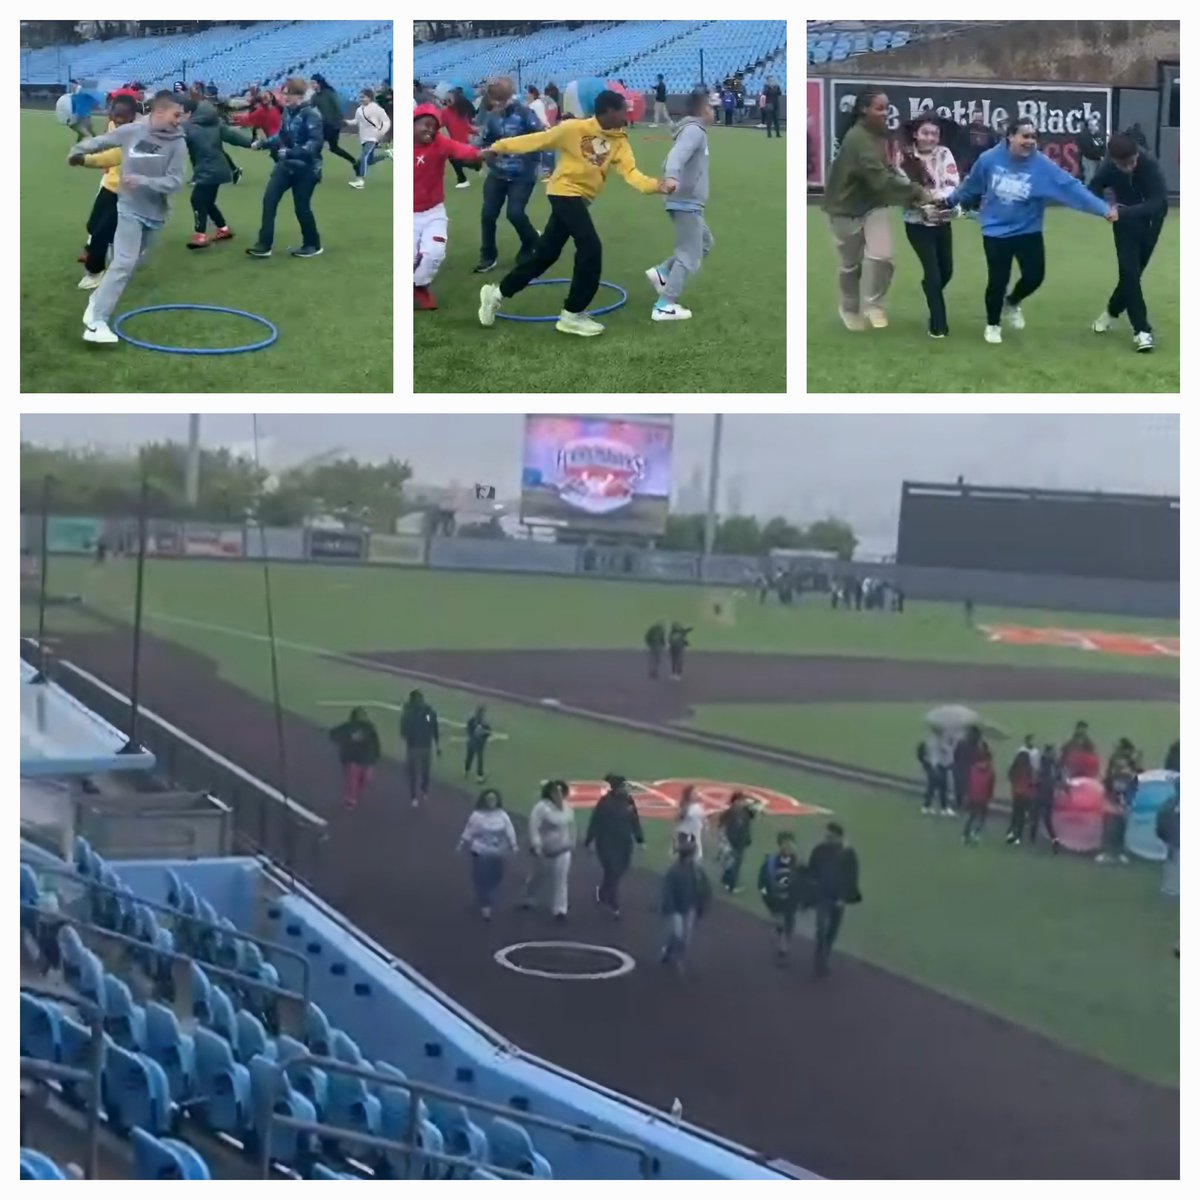 Our MBK and MSK groups had so much fun at the Ferry Hawk Stadium! @CSD31SI @Ms_Nat_Lawrence @DrMarionWilson @MSKSID31 @CliffordD31 @Perkforthepeeps